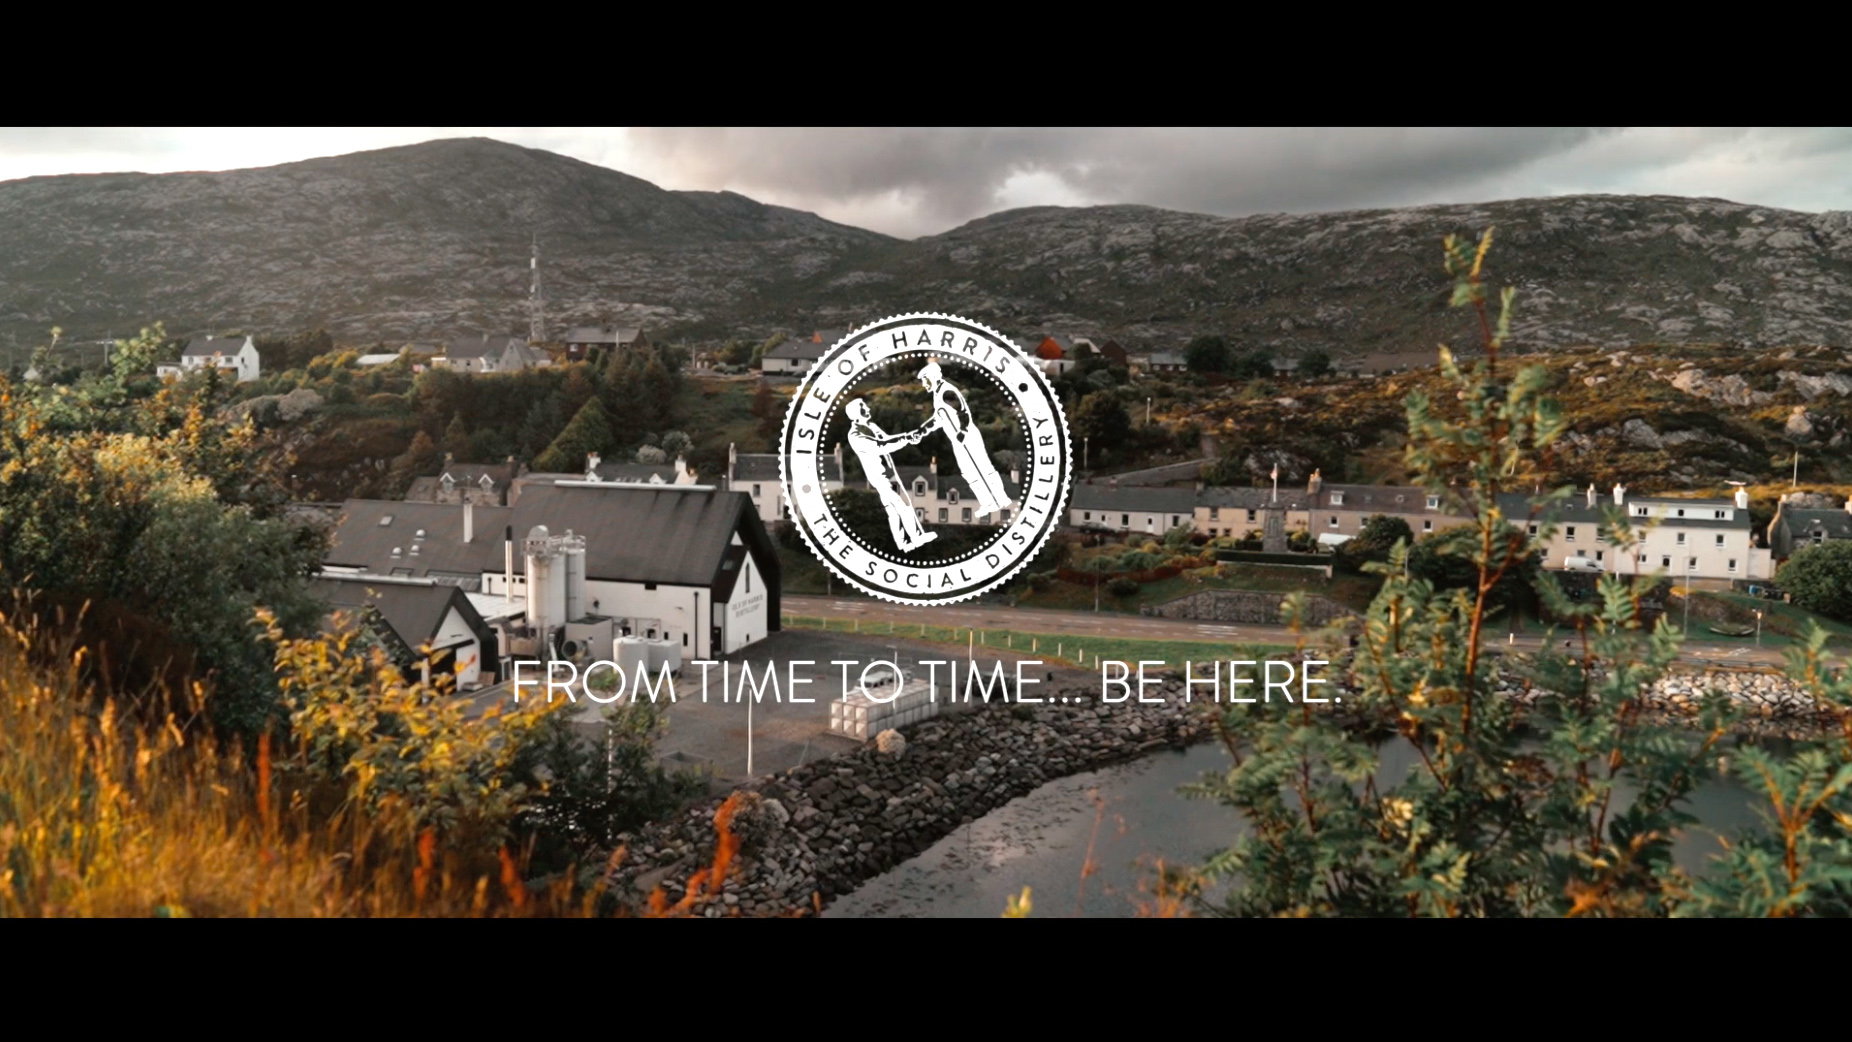 A short film reflecting the people and environment of Harris, showcasing the distillery at the heart of the community. 